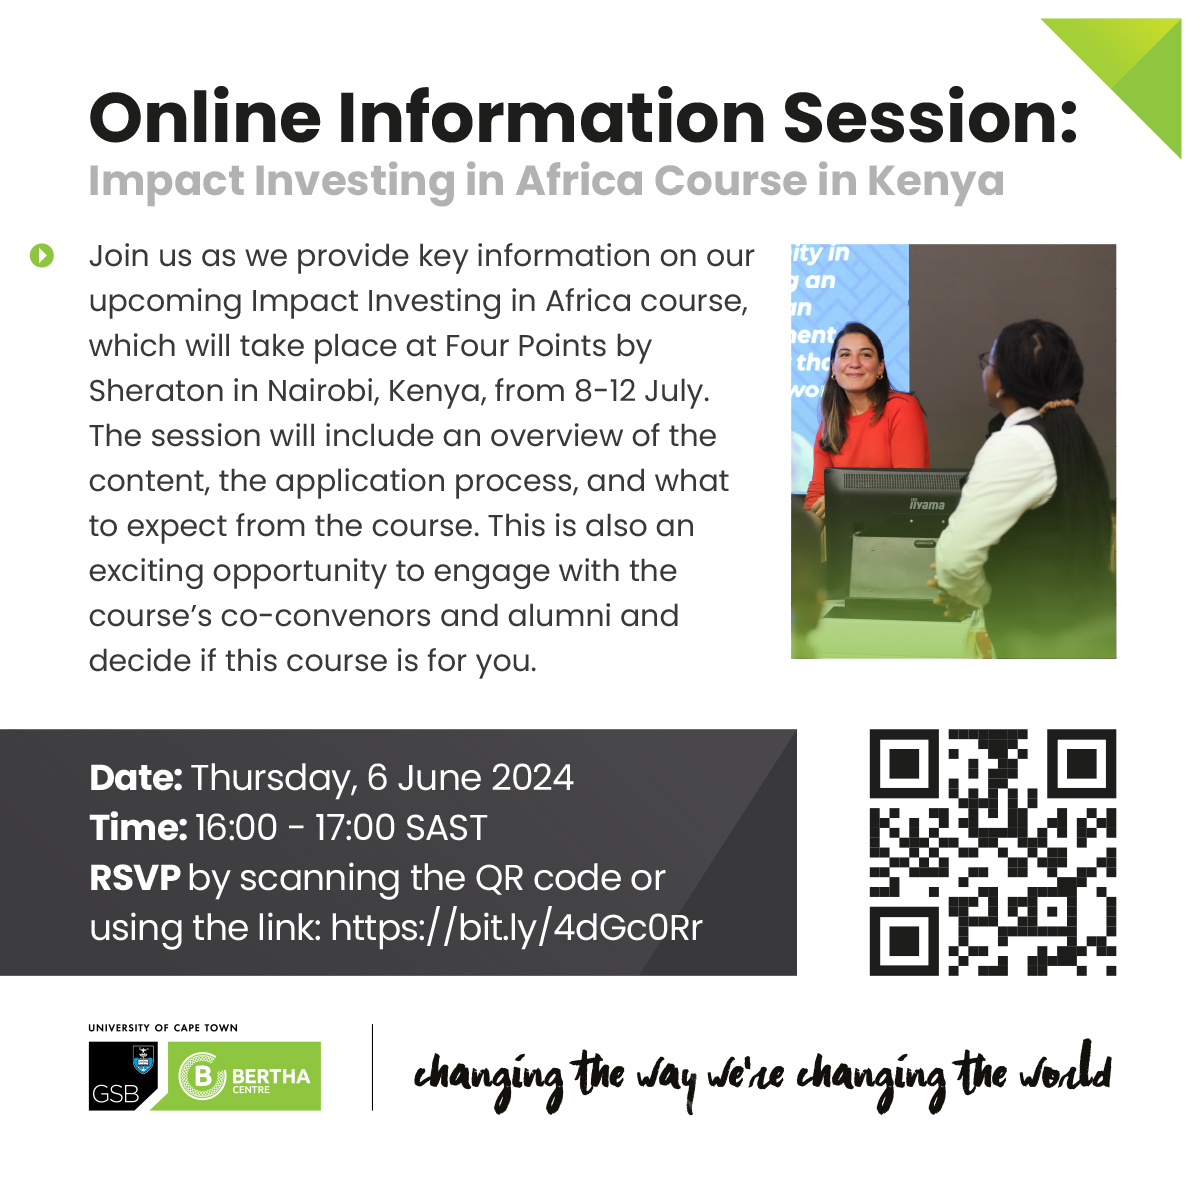 Join our Online Information Session for the Impact Investing in Africa Course in Kenya. This session is designed to give you an in-depth look into how this course can equip you with the knowledge and skills to make a meaningful impact. Register here: bit.ly/4dGc0Rr